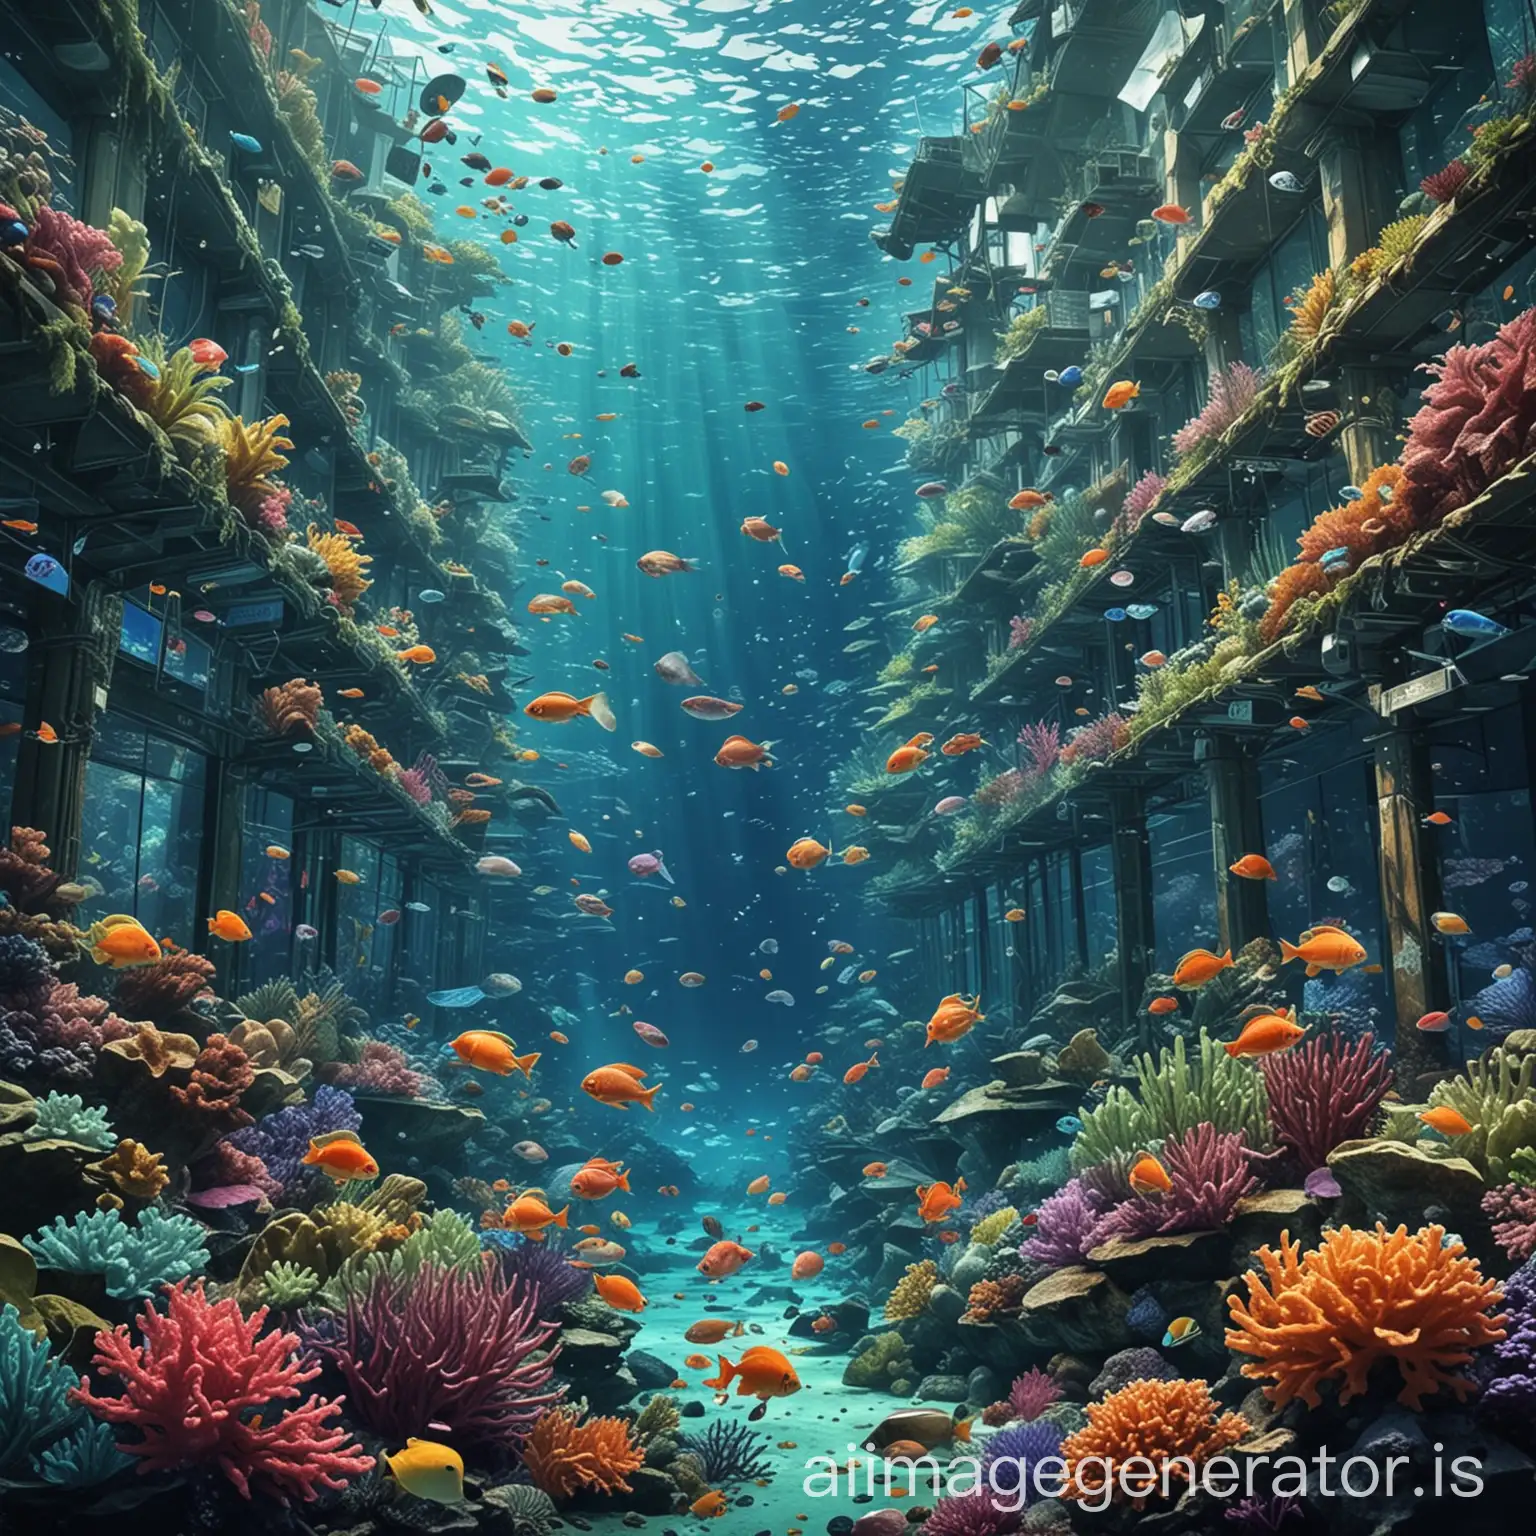 Generate 5 images in anime style, comparing financial markets and ocean ecosystems. Each image should blend elements of both: Ocean: Colorful fish, coral reefs, seaweed, and other marine life Financial markets: Bank buildings, digital screens displaying financial data, stock exchange trading floors with people Show the interconnectedness and complexity of both systems. Include vibrant colors and dynamic compositions typical of anime art style. Emphasize the contrast between the natural underwater world and the high-tech financial environment.